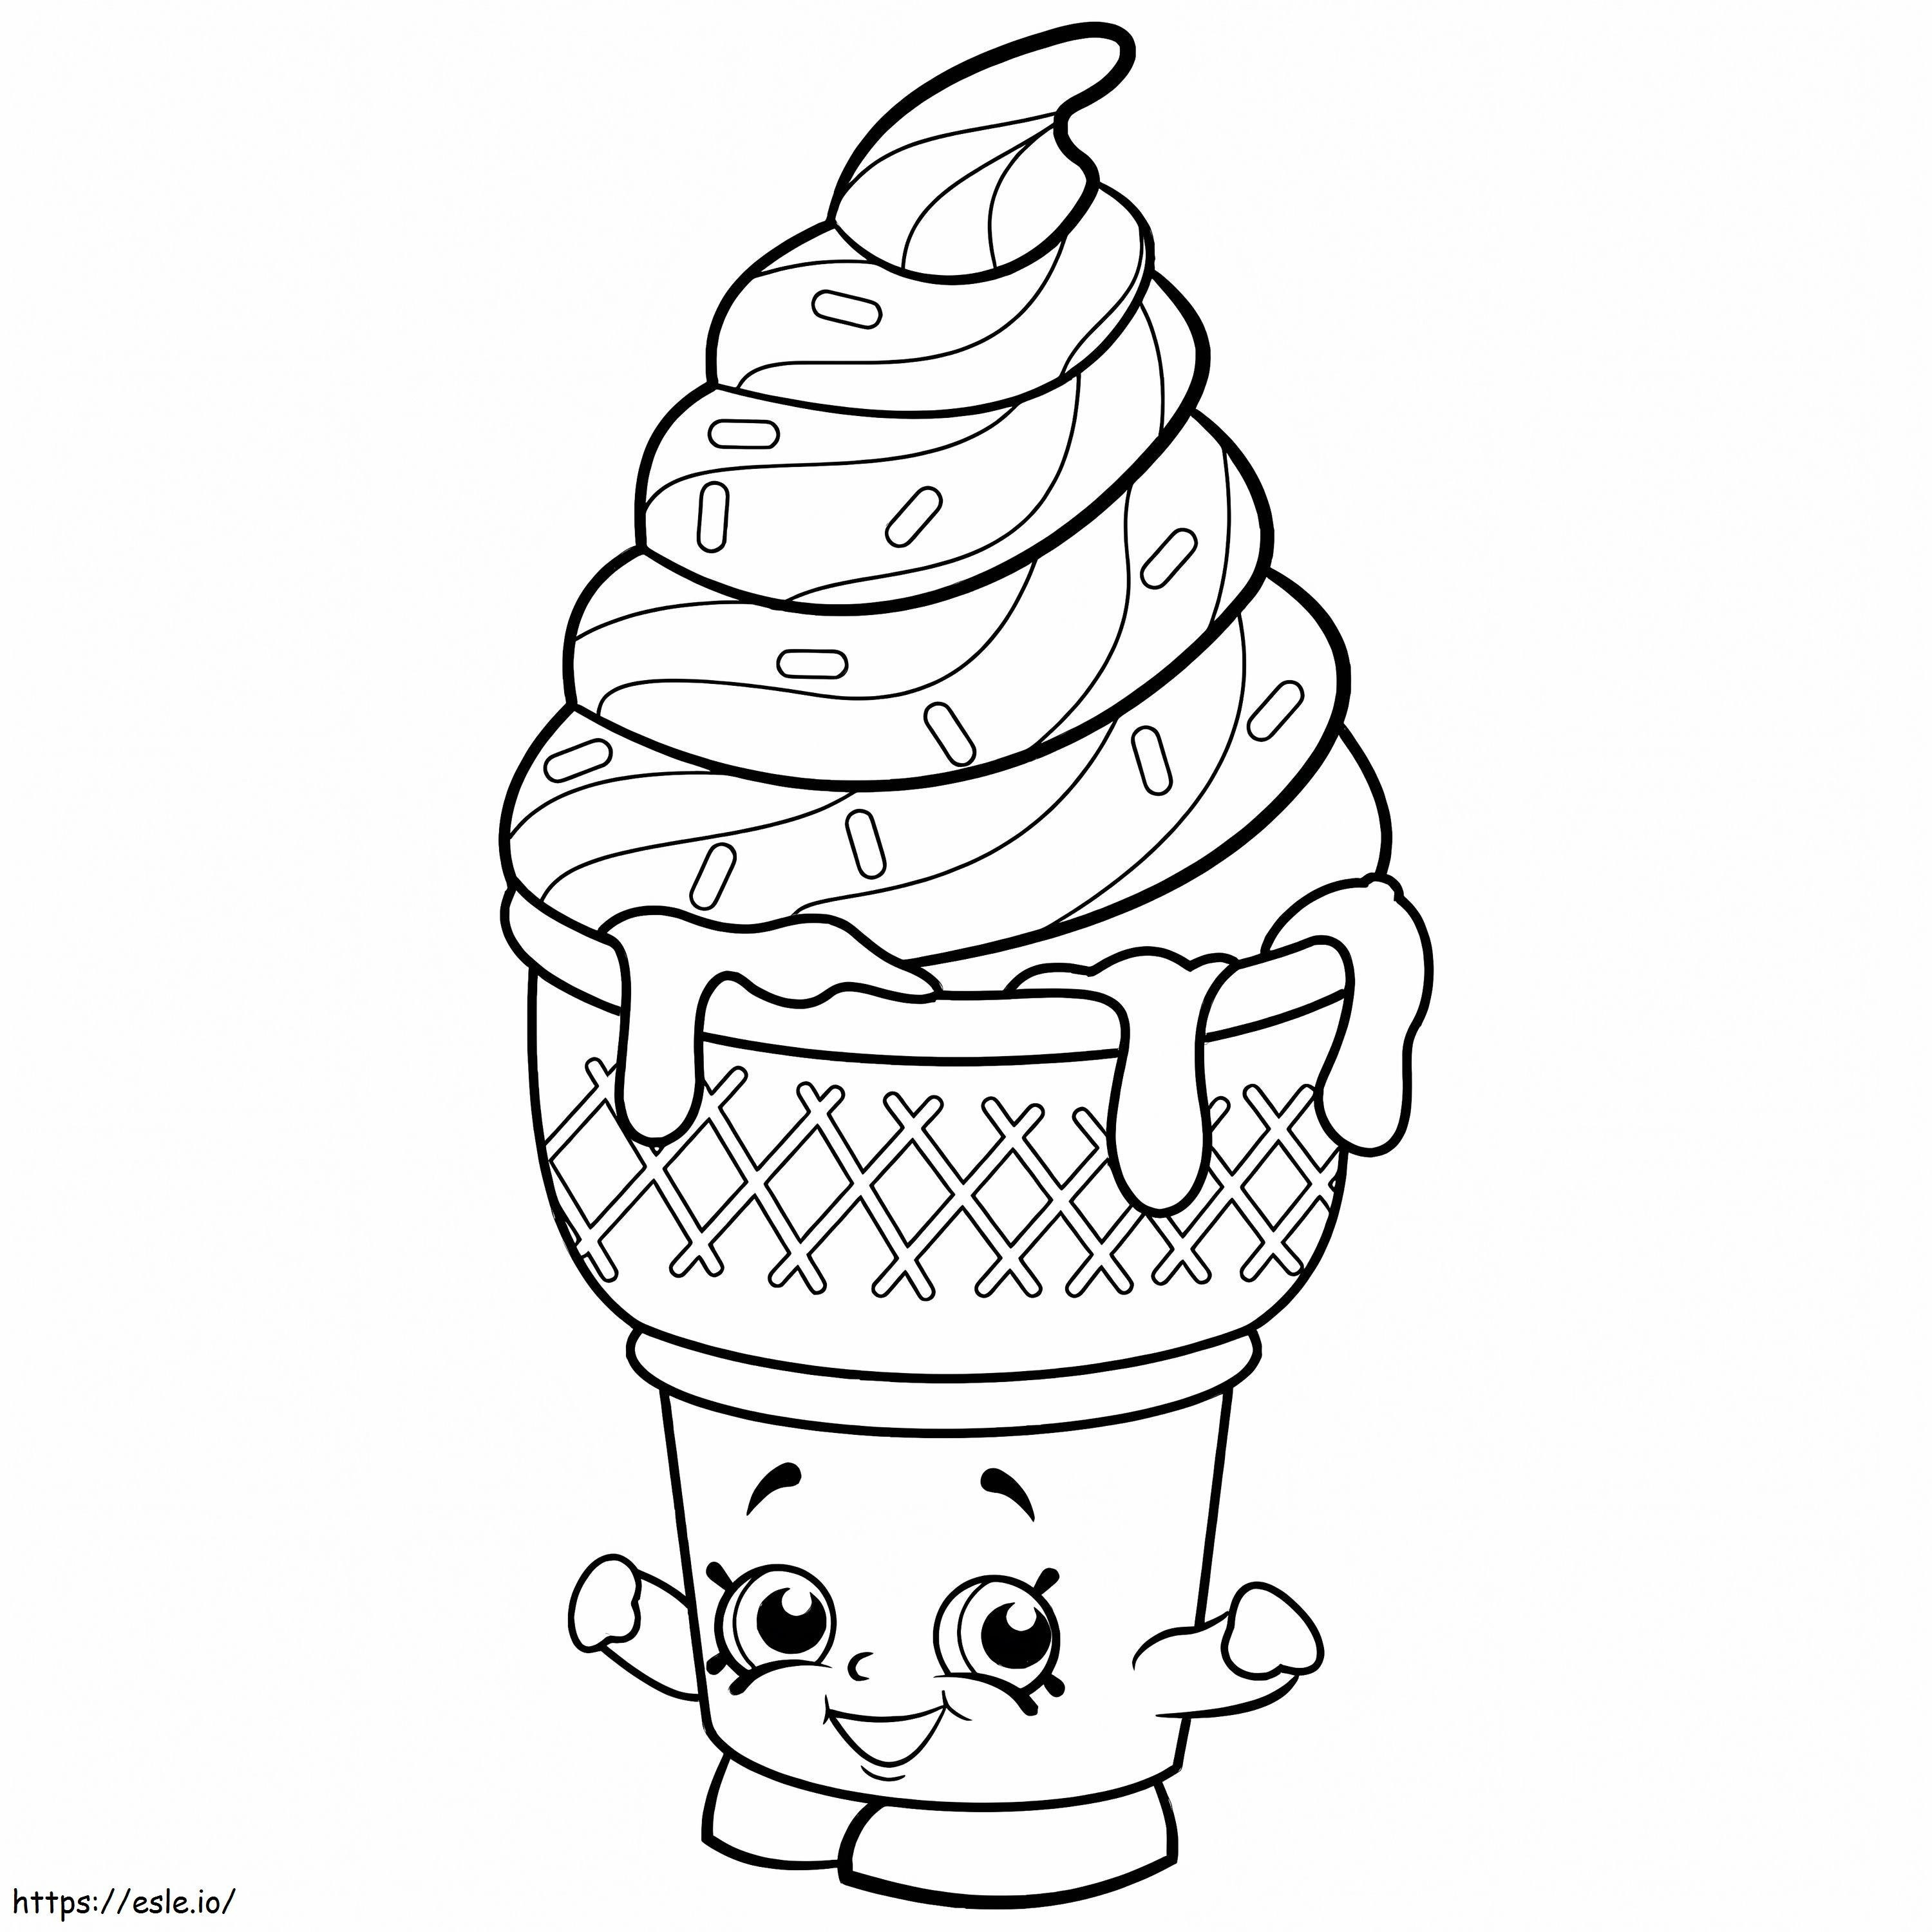 Sweet Ice Cream Dream Shopkins coloring page